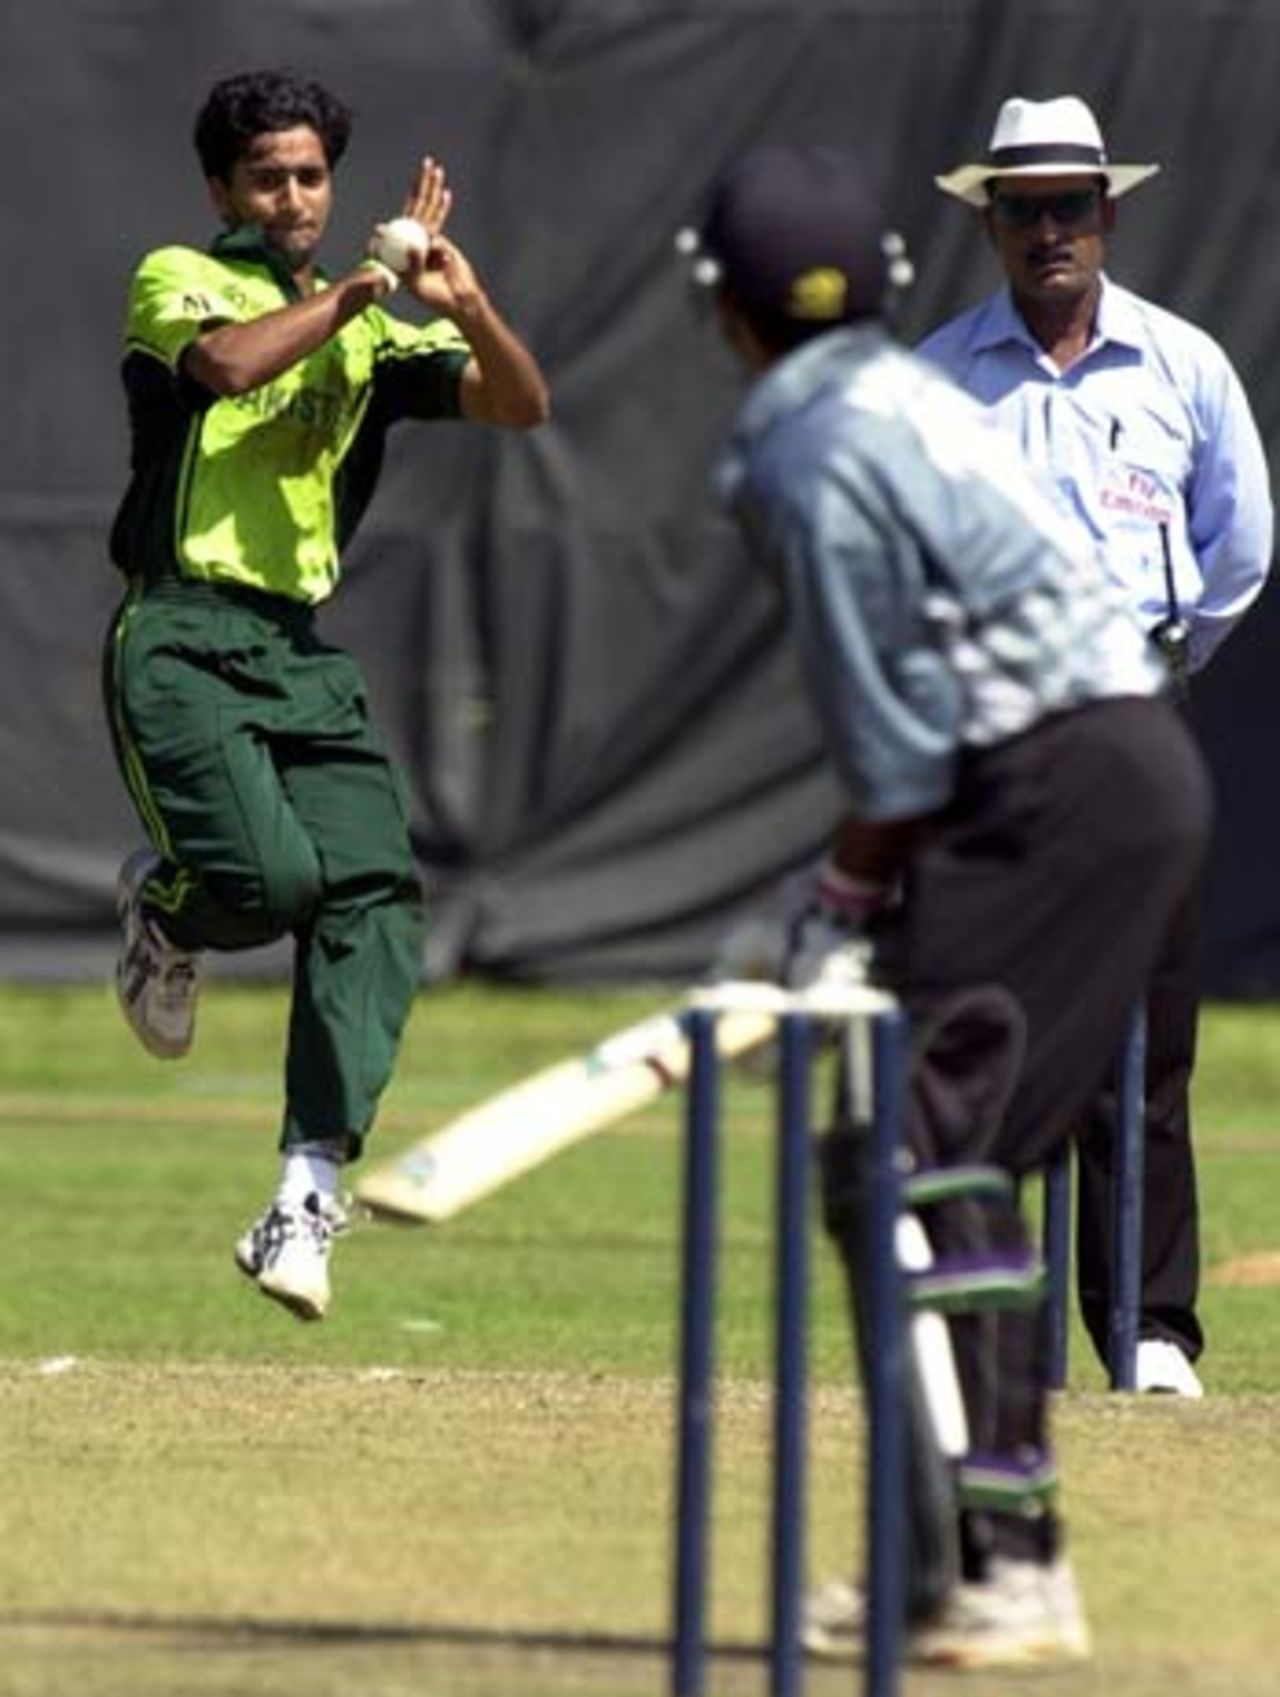 Jamshed Ahmed in action, Pakistan v New Zealand, U-19 World Cup, Colombo, February 10, 2006